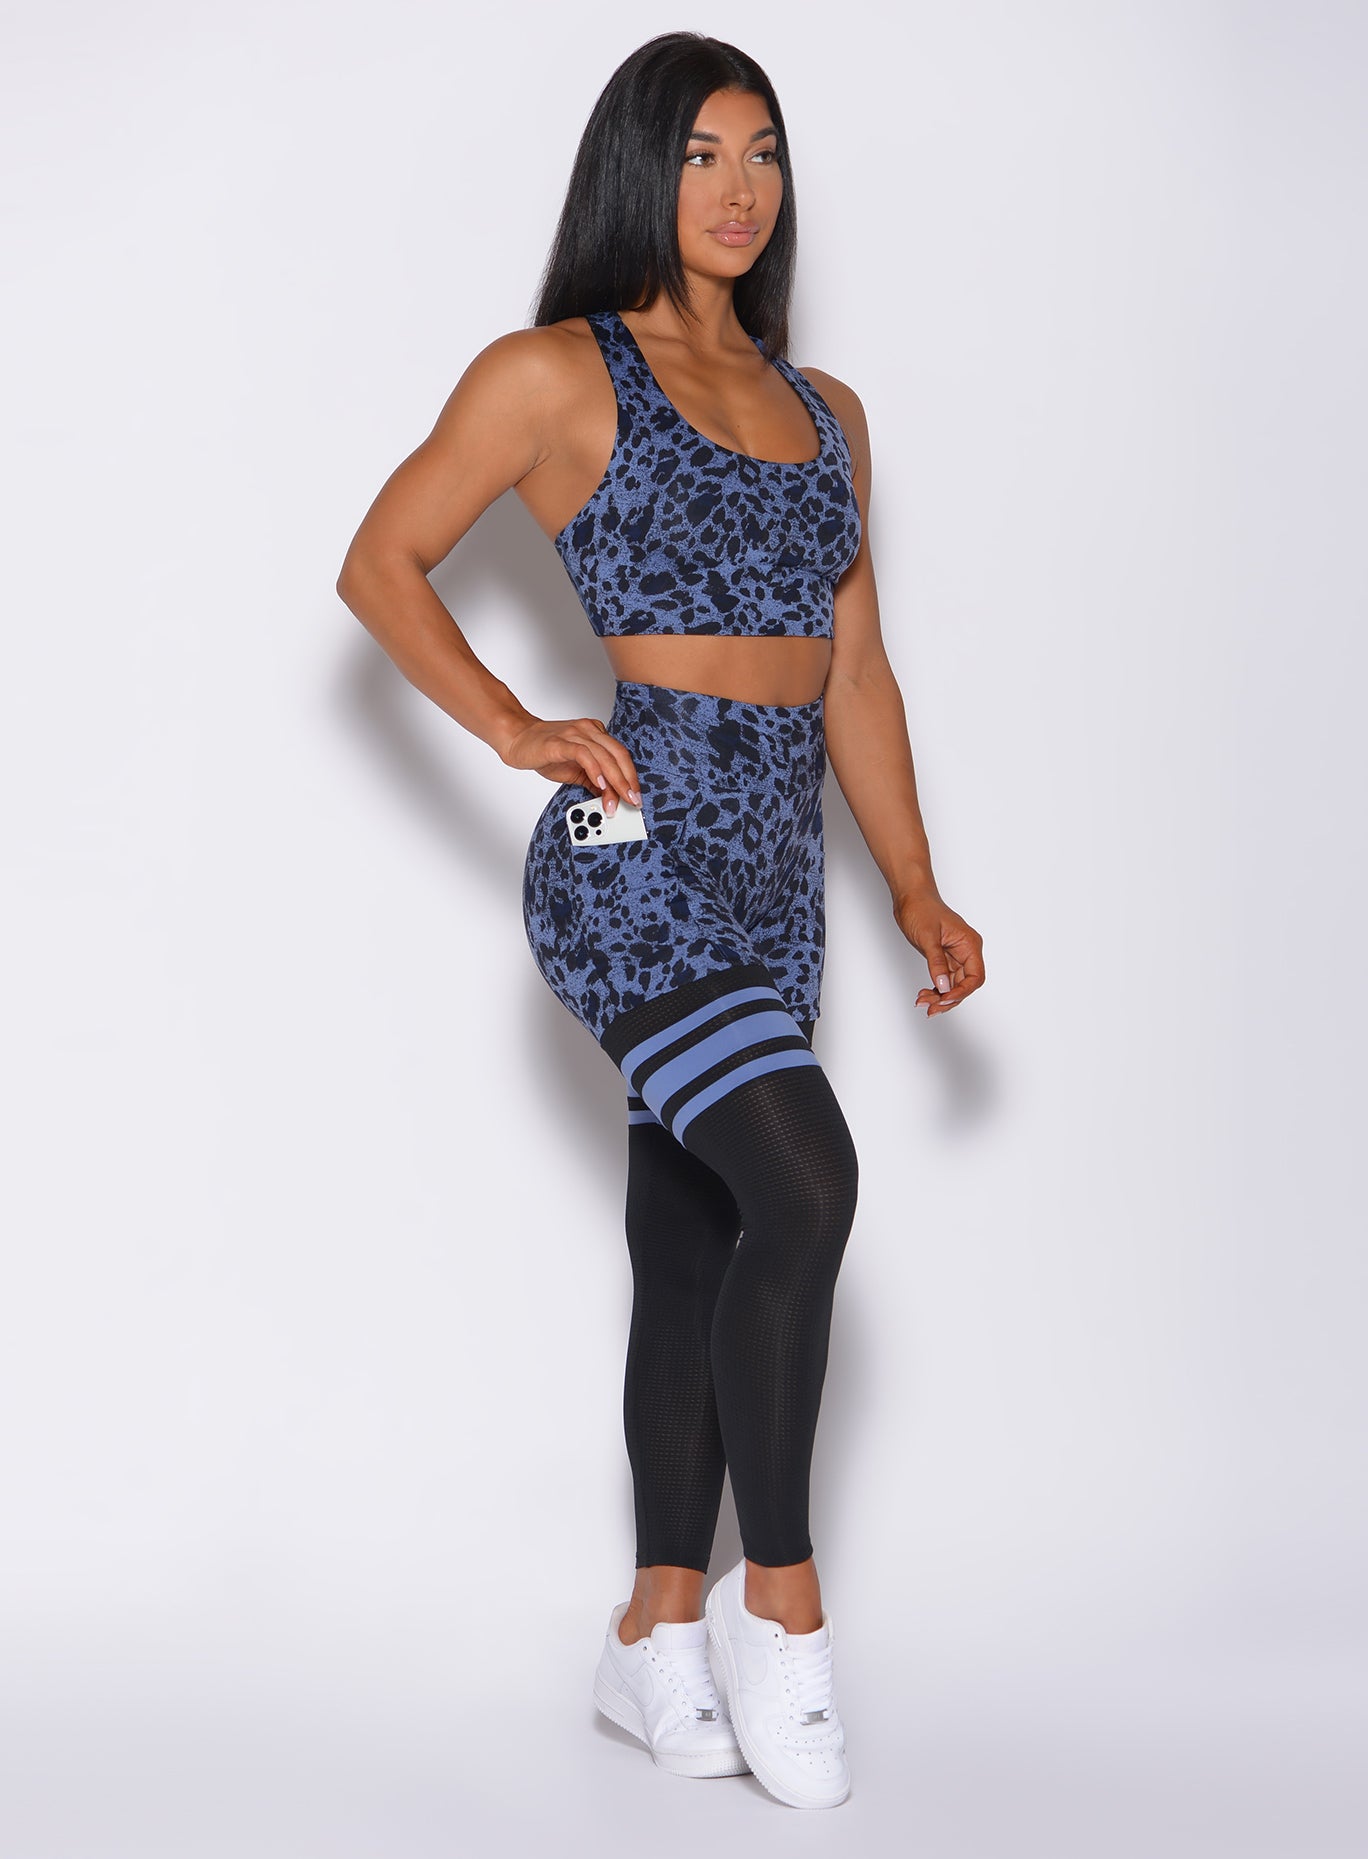 Right side profile view of a model facing forward wearing our scrunch thigh high in blue leopard print and a matching sports bra